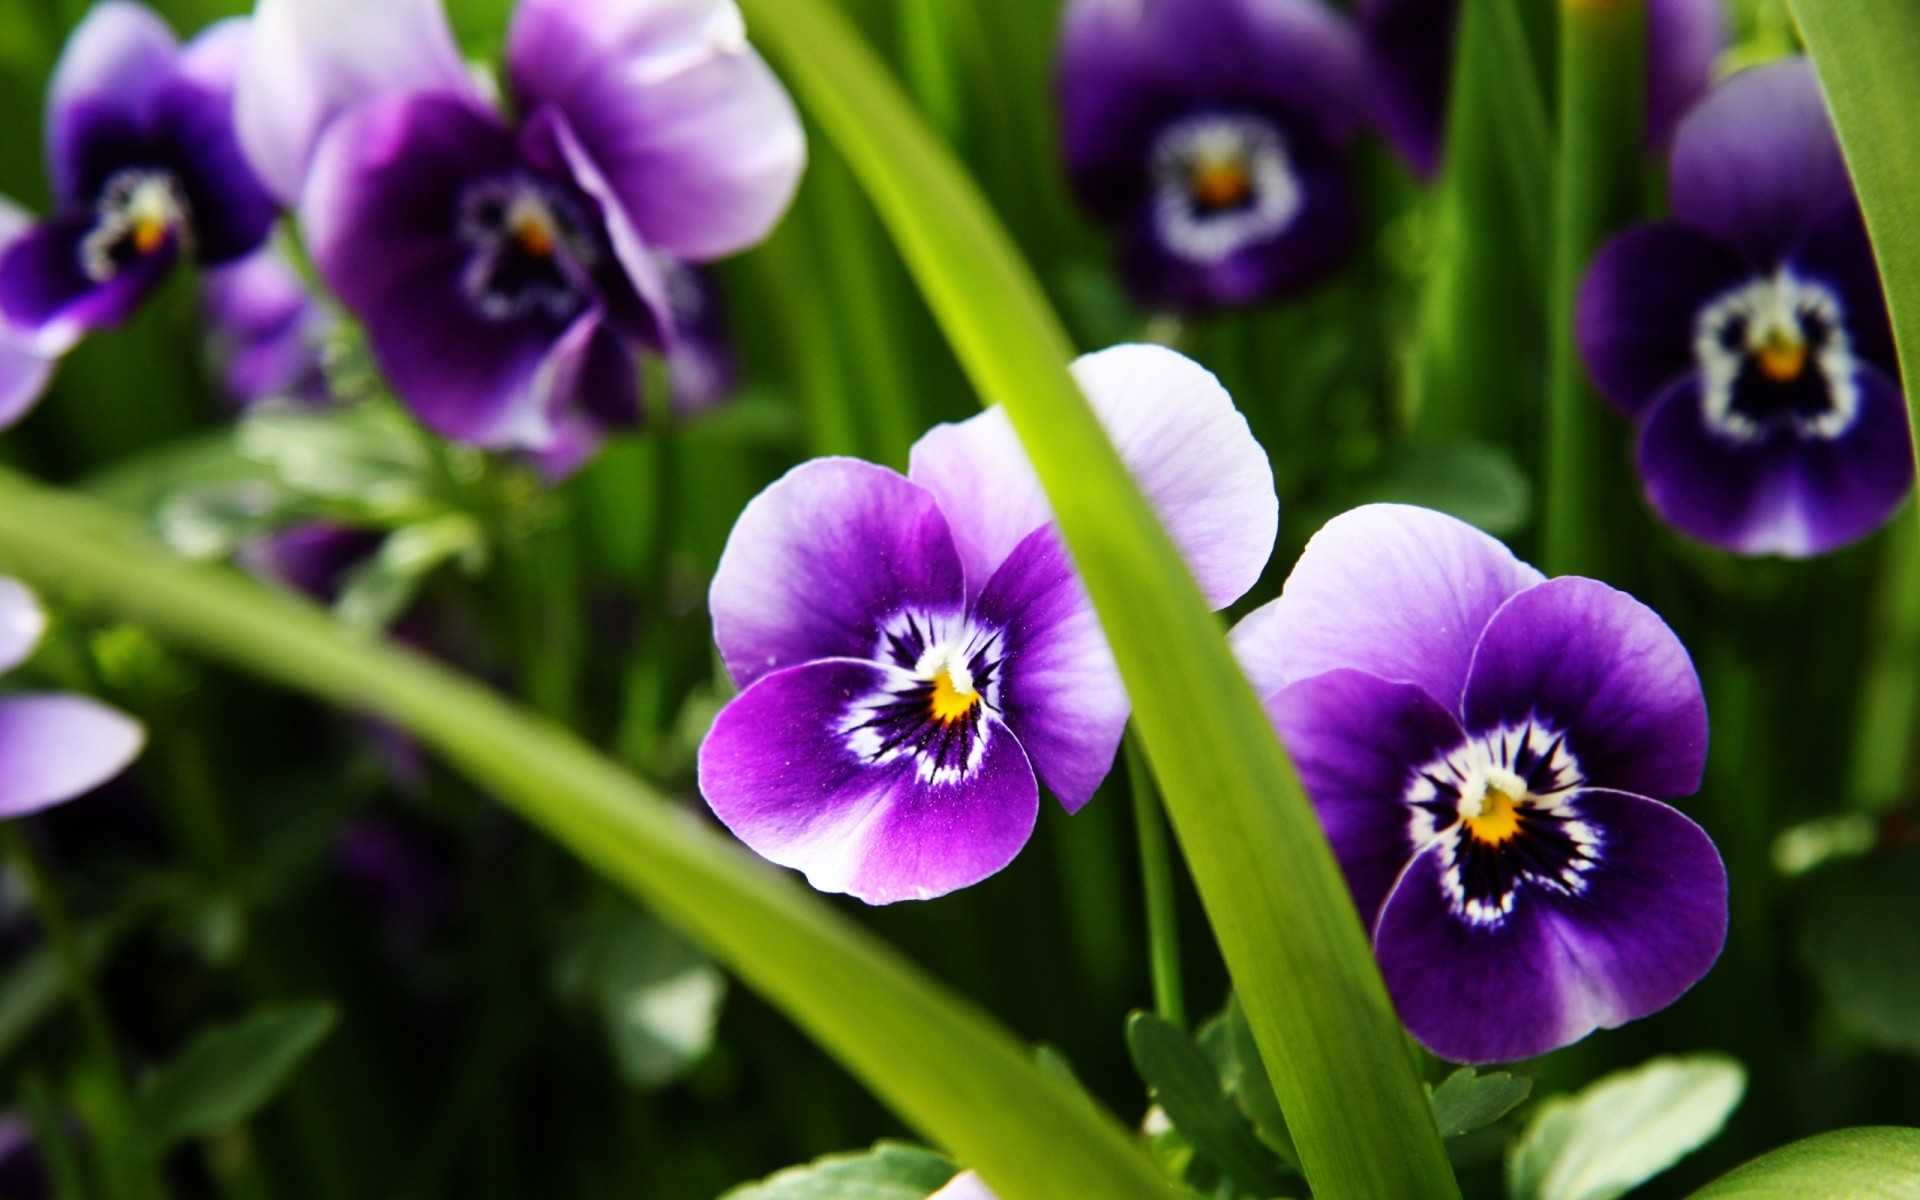 flowers flower nature flora floral leaf garden blooming violet bright summer petal color easter growth field season bouquet beautiful close-up background plants spring